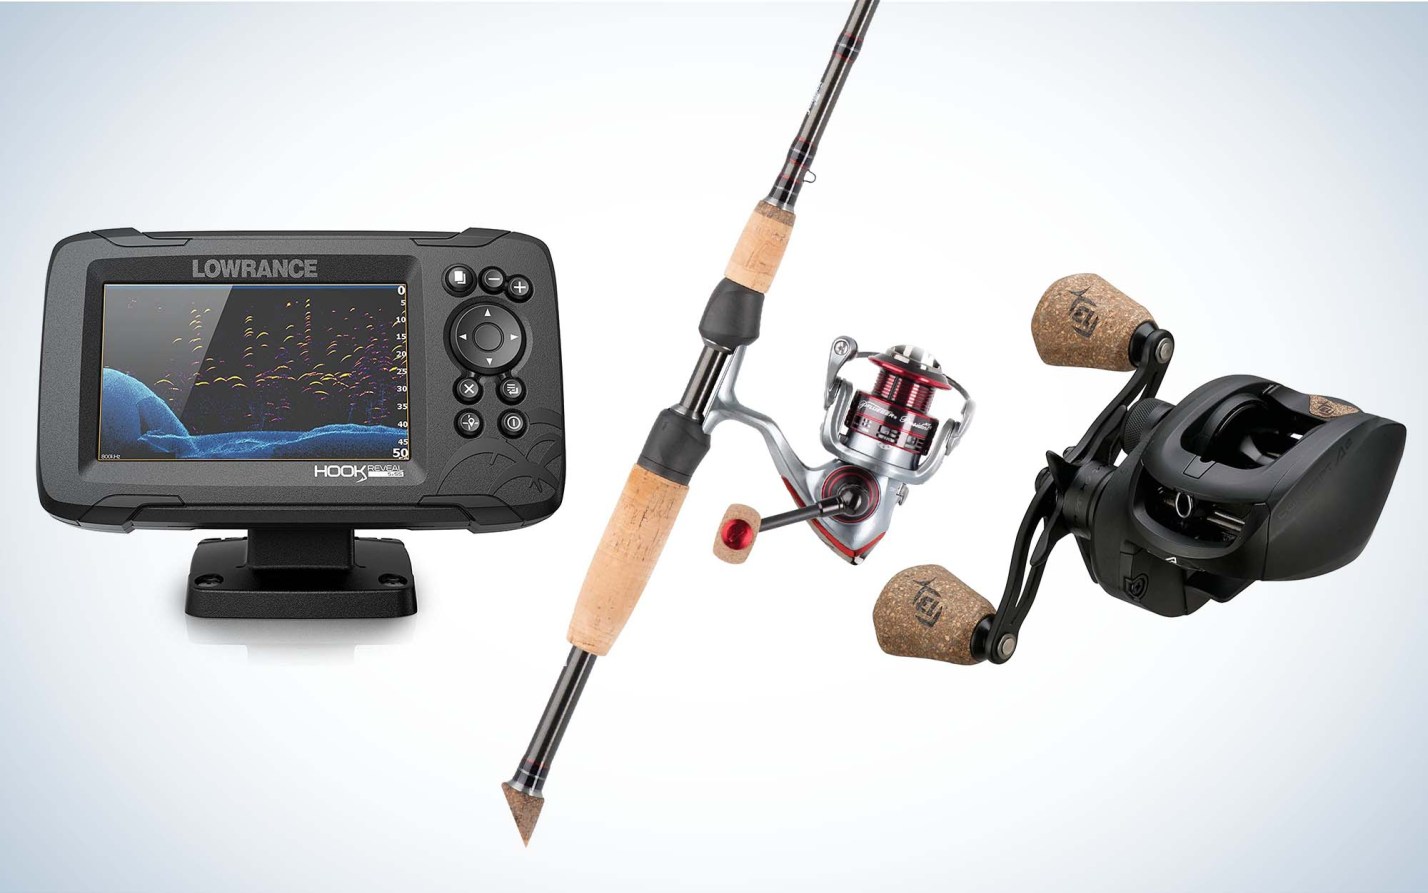 Amazon fishing rod, reel, and fish finder deals